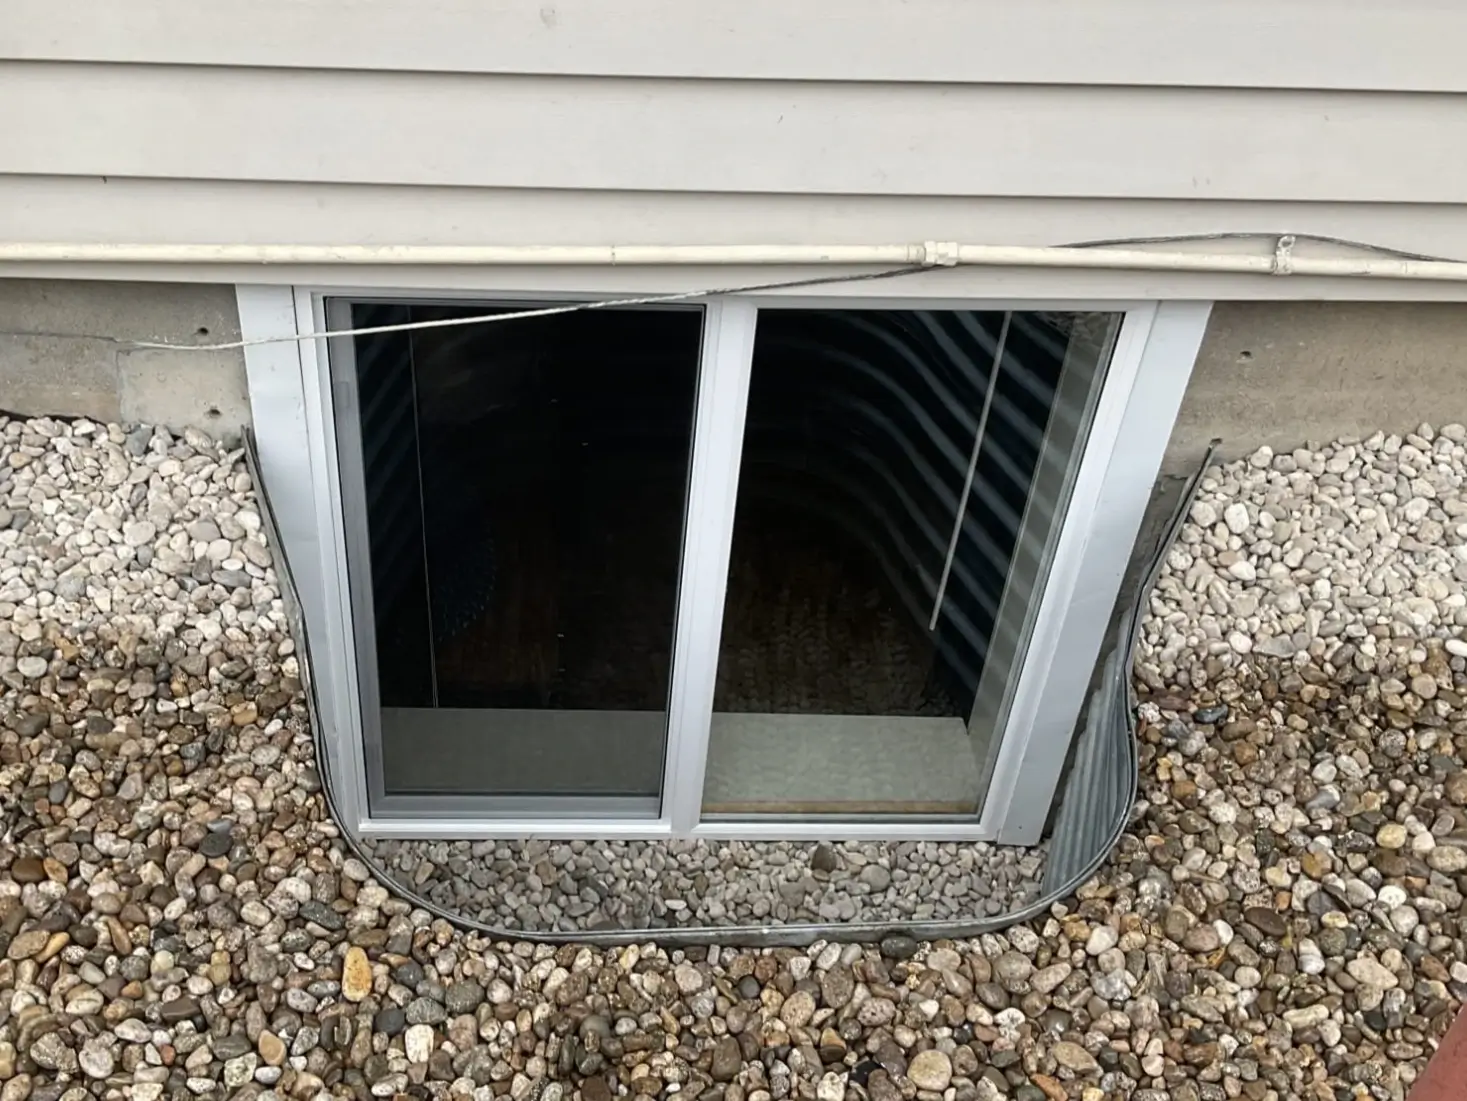 A client testimonial image of a white trimmed window in a partial basement. The ground around it is covered in gravel.